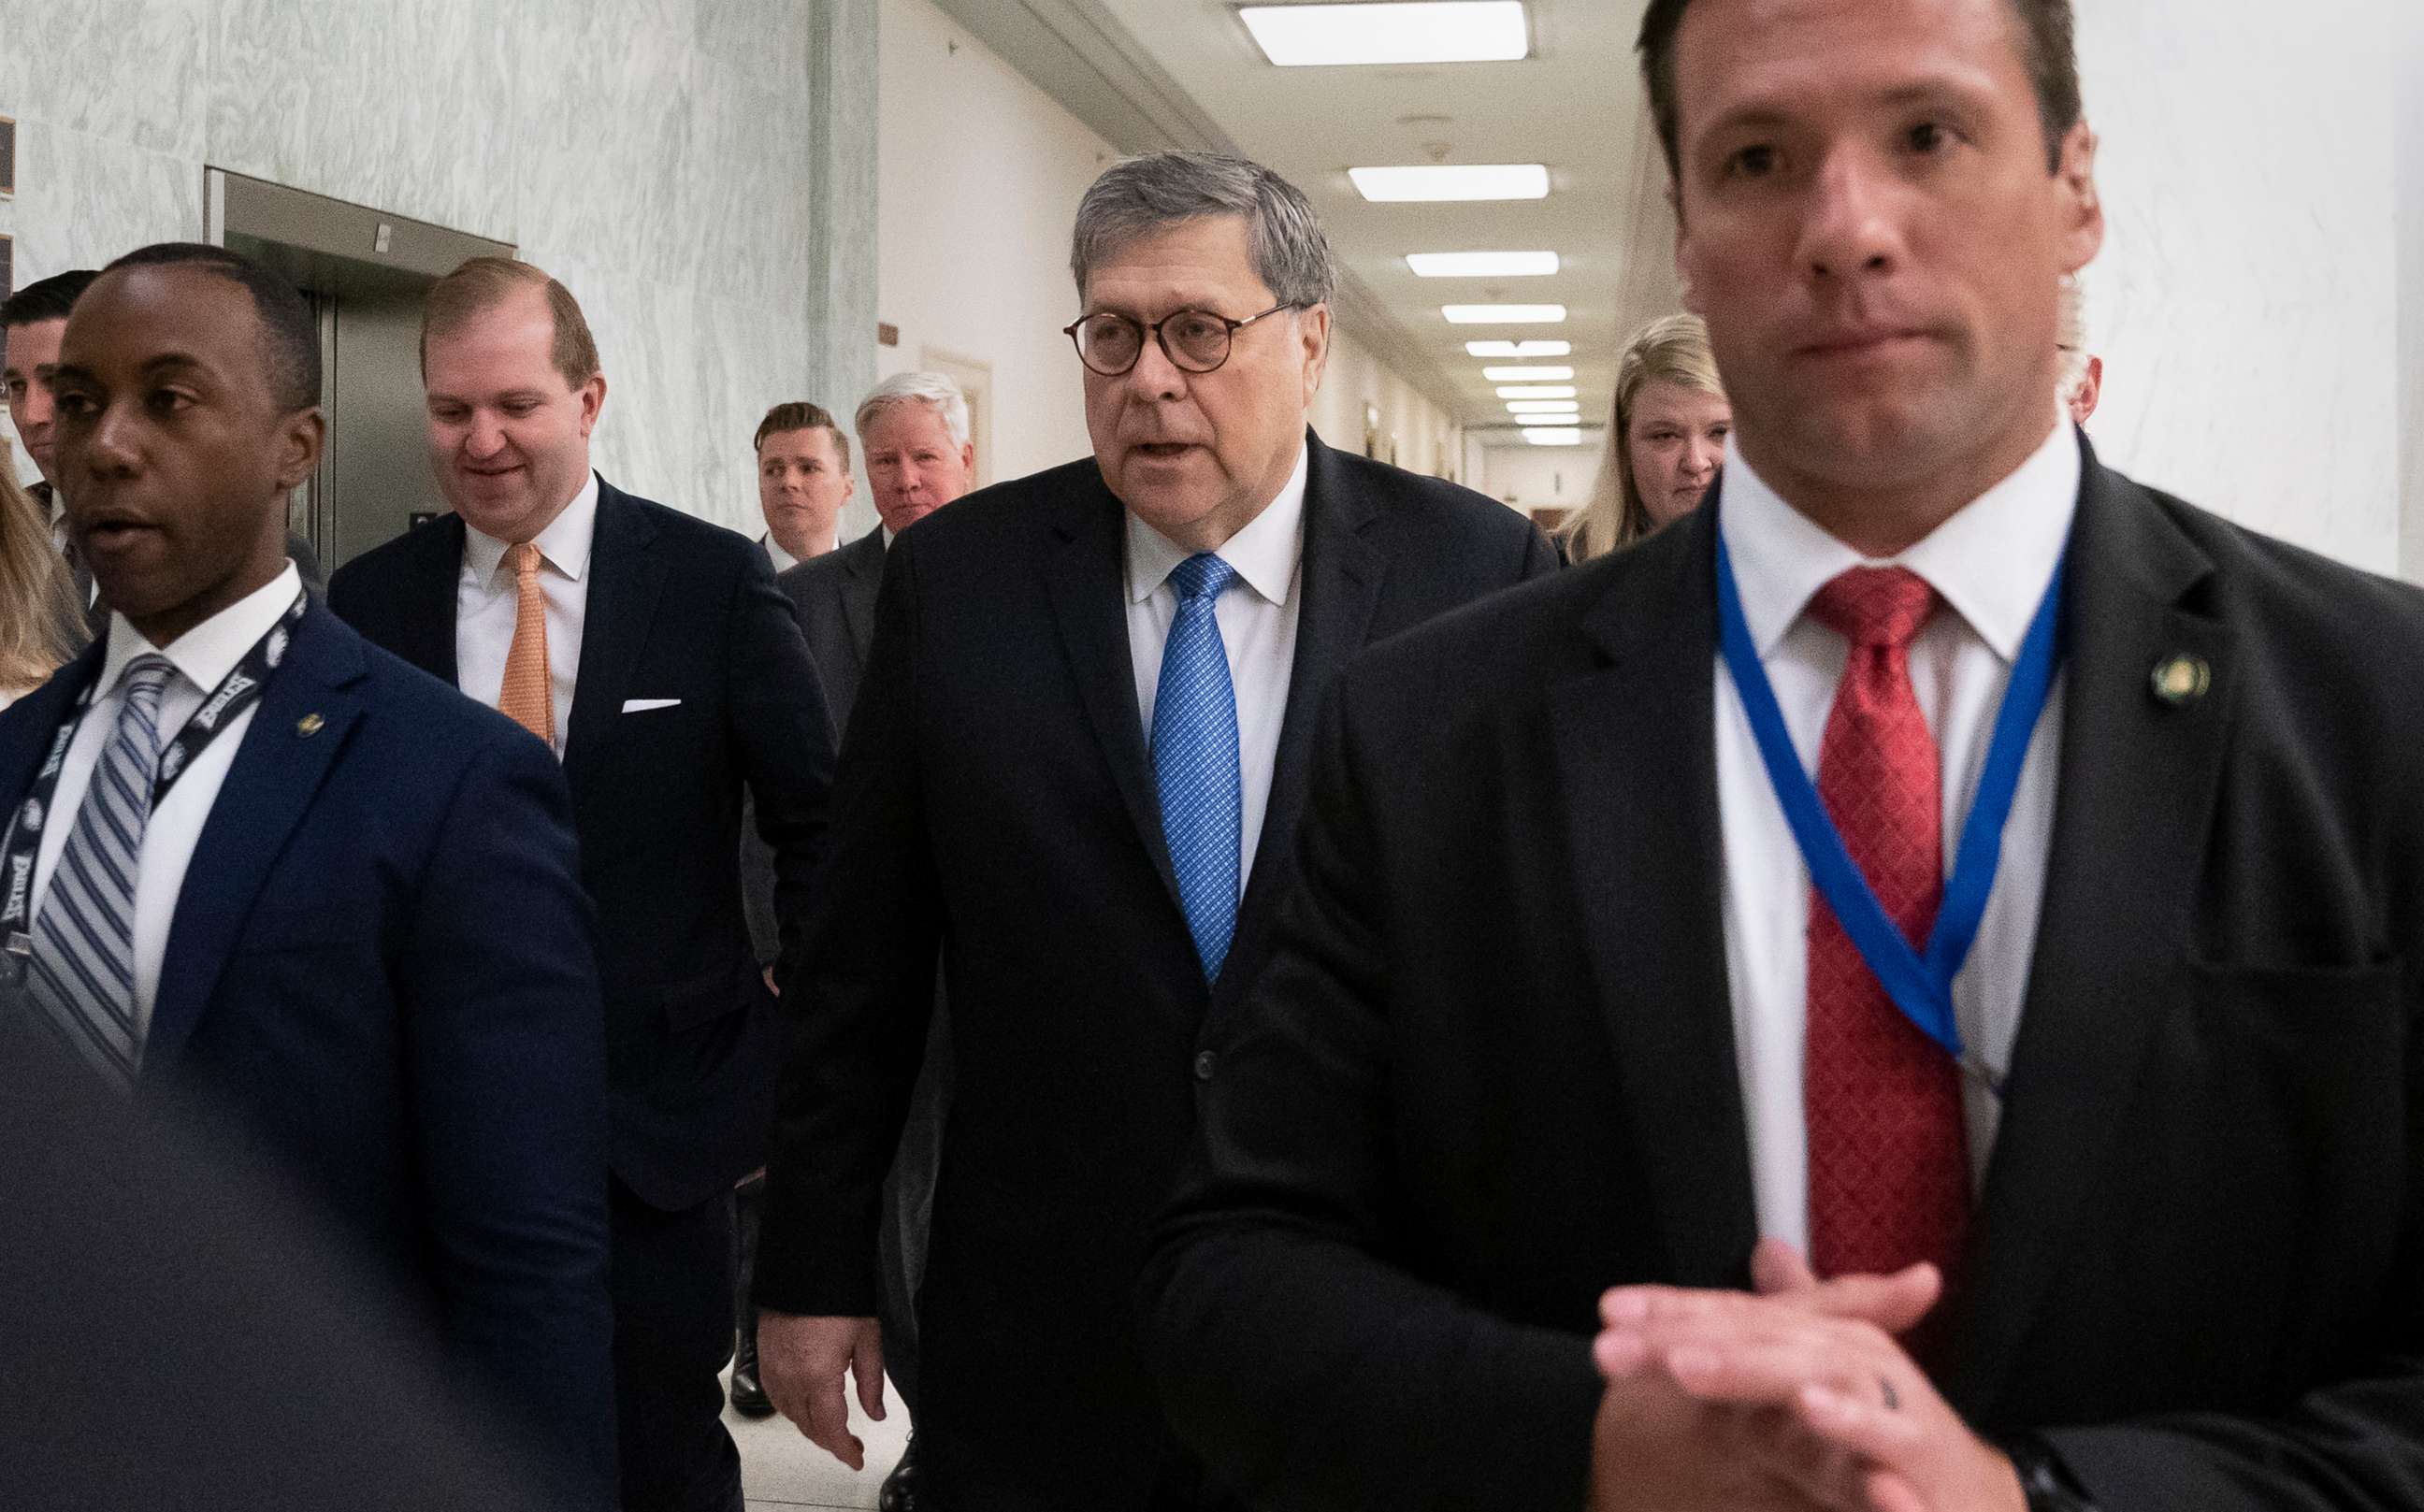 PHOTO: Attorney General William Barr arrives to appears before a House Appropriations subcommittee in Washington, D.C., April 9, 2019.